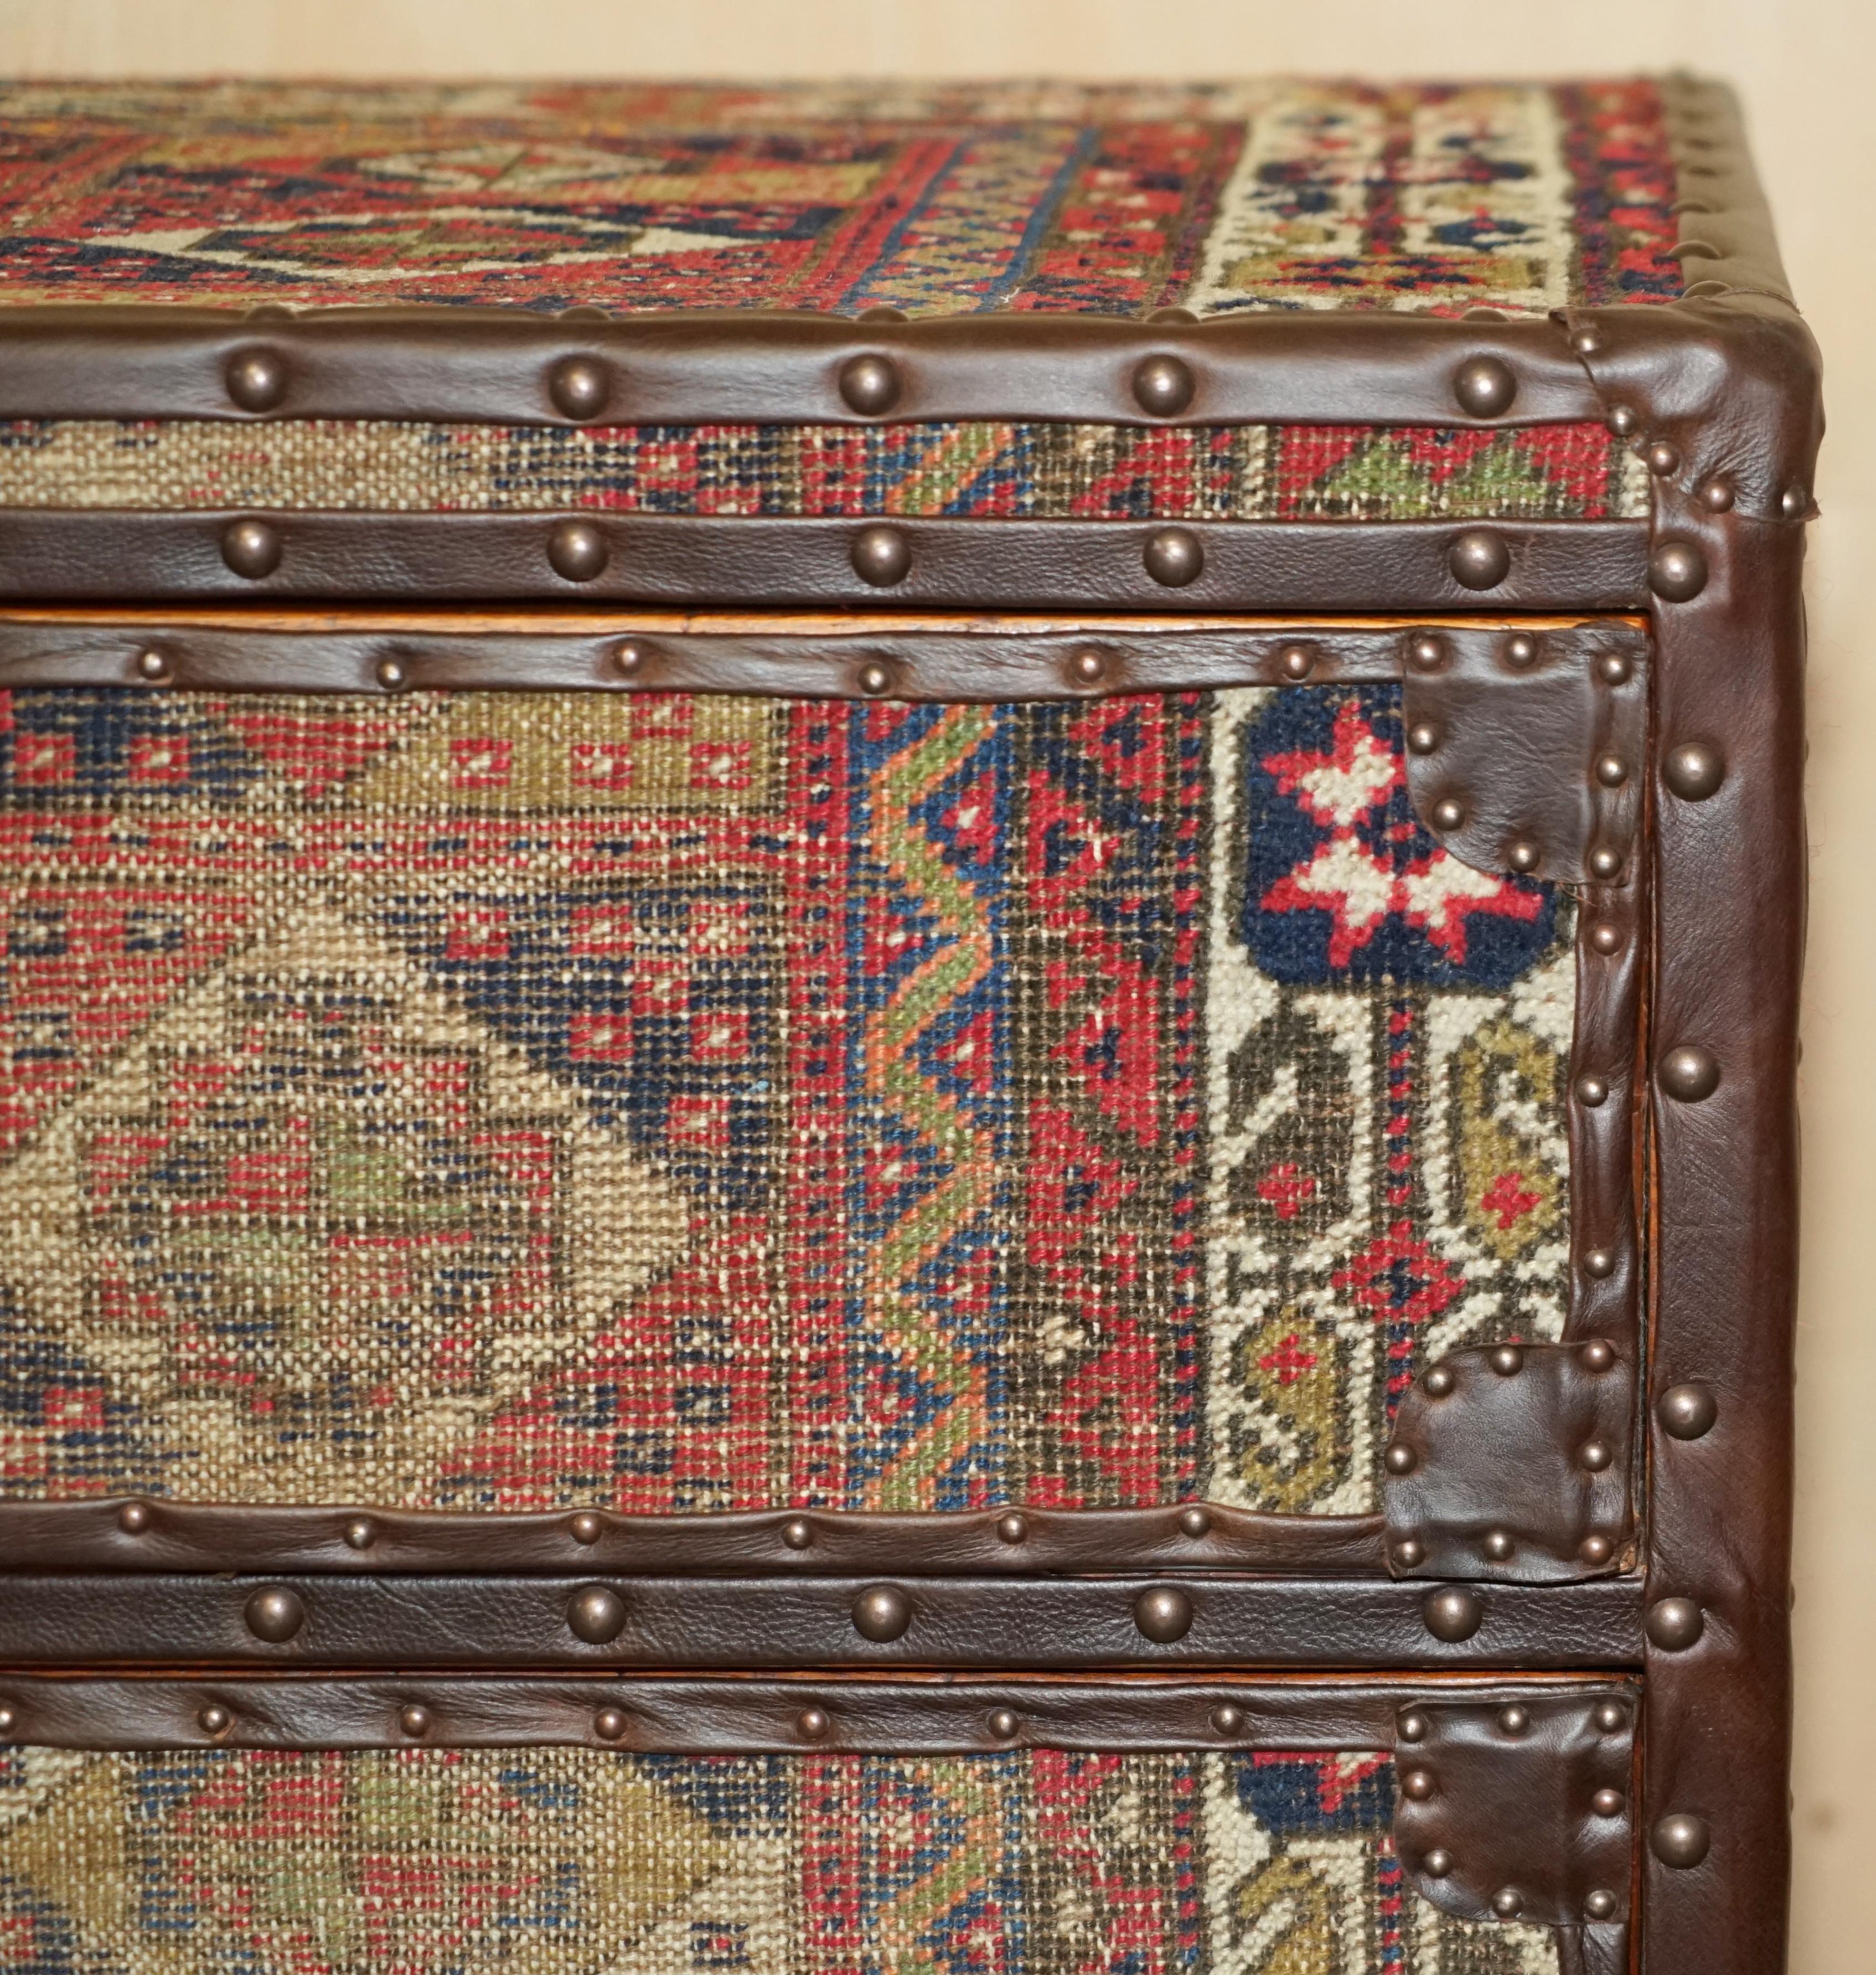 ViNTAGE KILIM & BROWN LEATHER CHEST OF DRAWERS FINISHED WITH ANTIQUE PIN NAILs (Leder) im Angebot